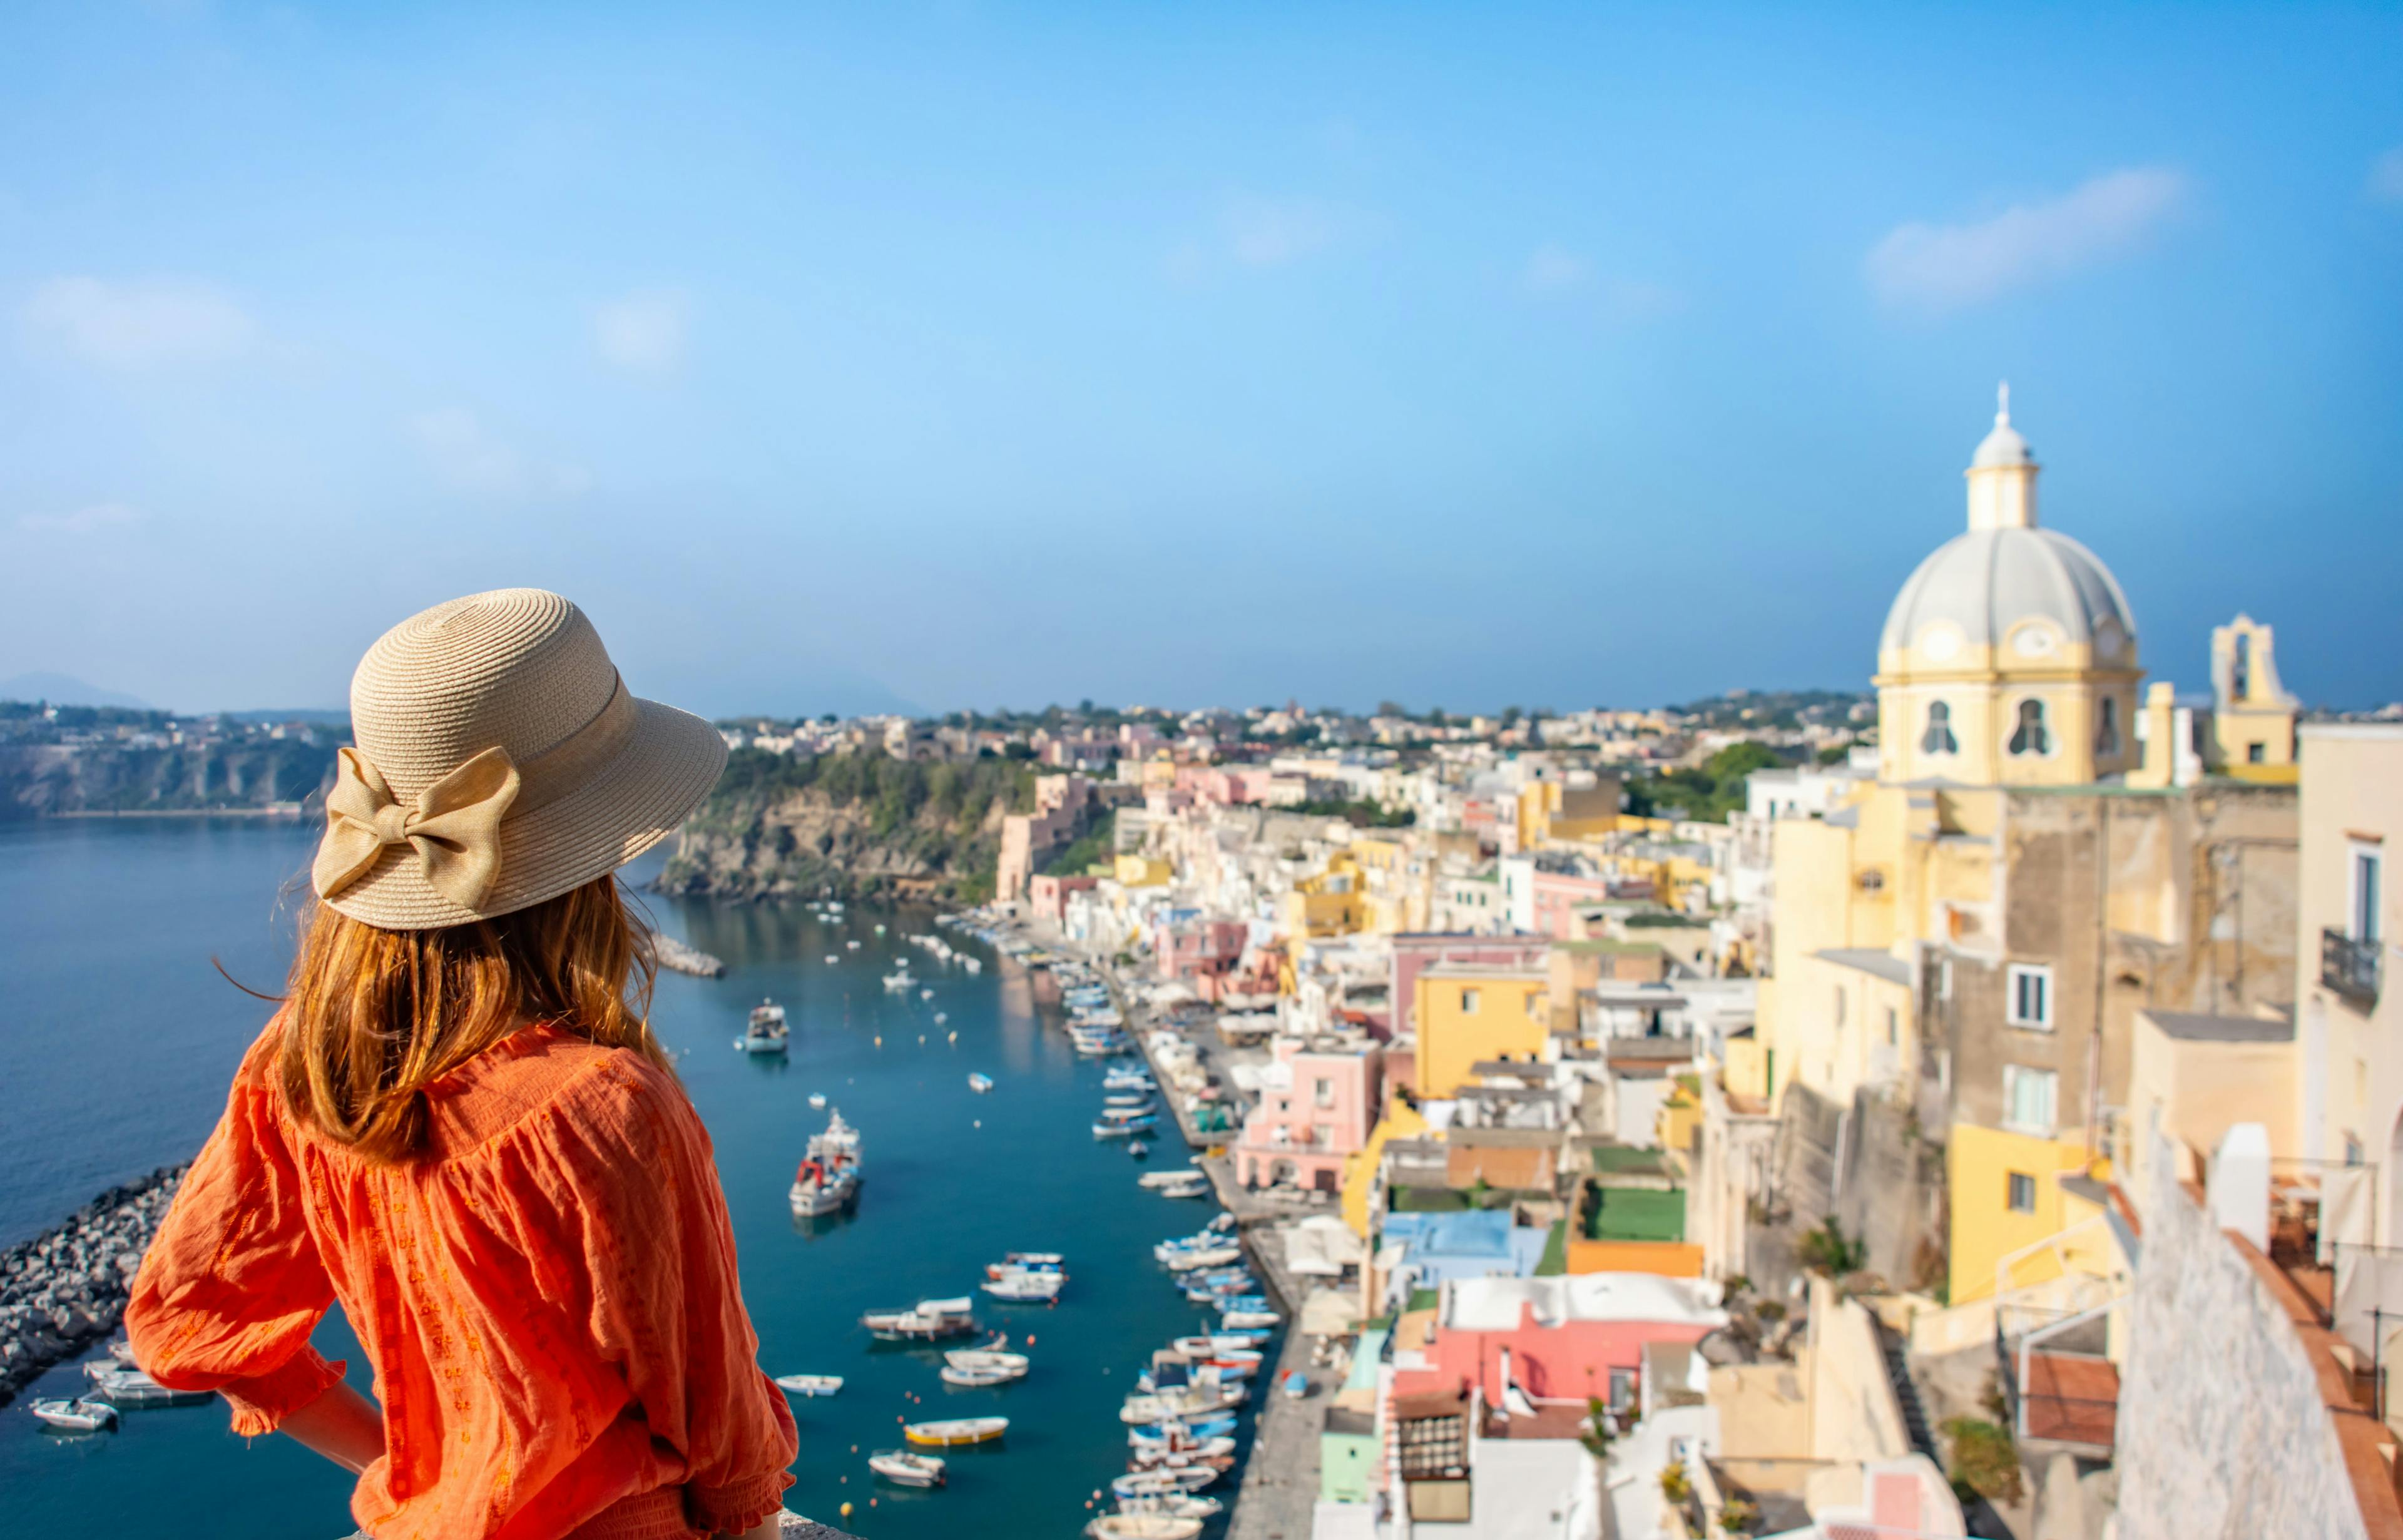 woman,young,church,happy,destination,panoramic,tourism,corricella,scenic,sea,space,summer,tourist,beautiful,rear,seascape,view,hat,copy,female,landmark,europe,naples,procida,italy,architecture,town,nature,island,relax,italian,girl,mediterranean,coast,marina,buildings,sensuality,travel,landscape clothing hat sun hat adult female person woman boat vehicle cityscape